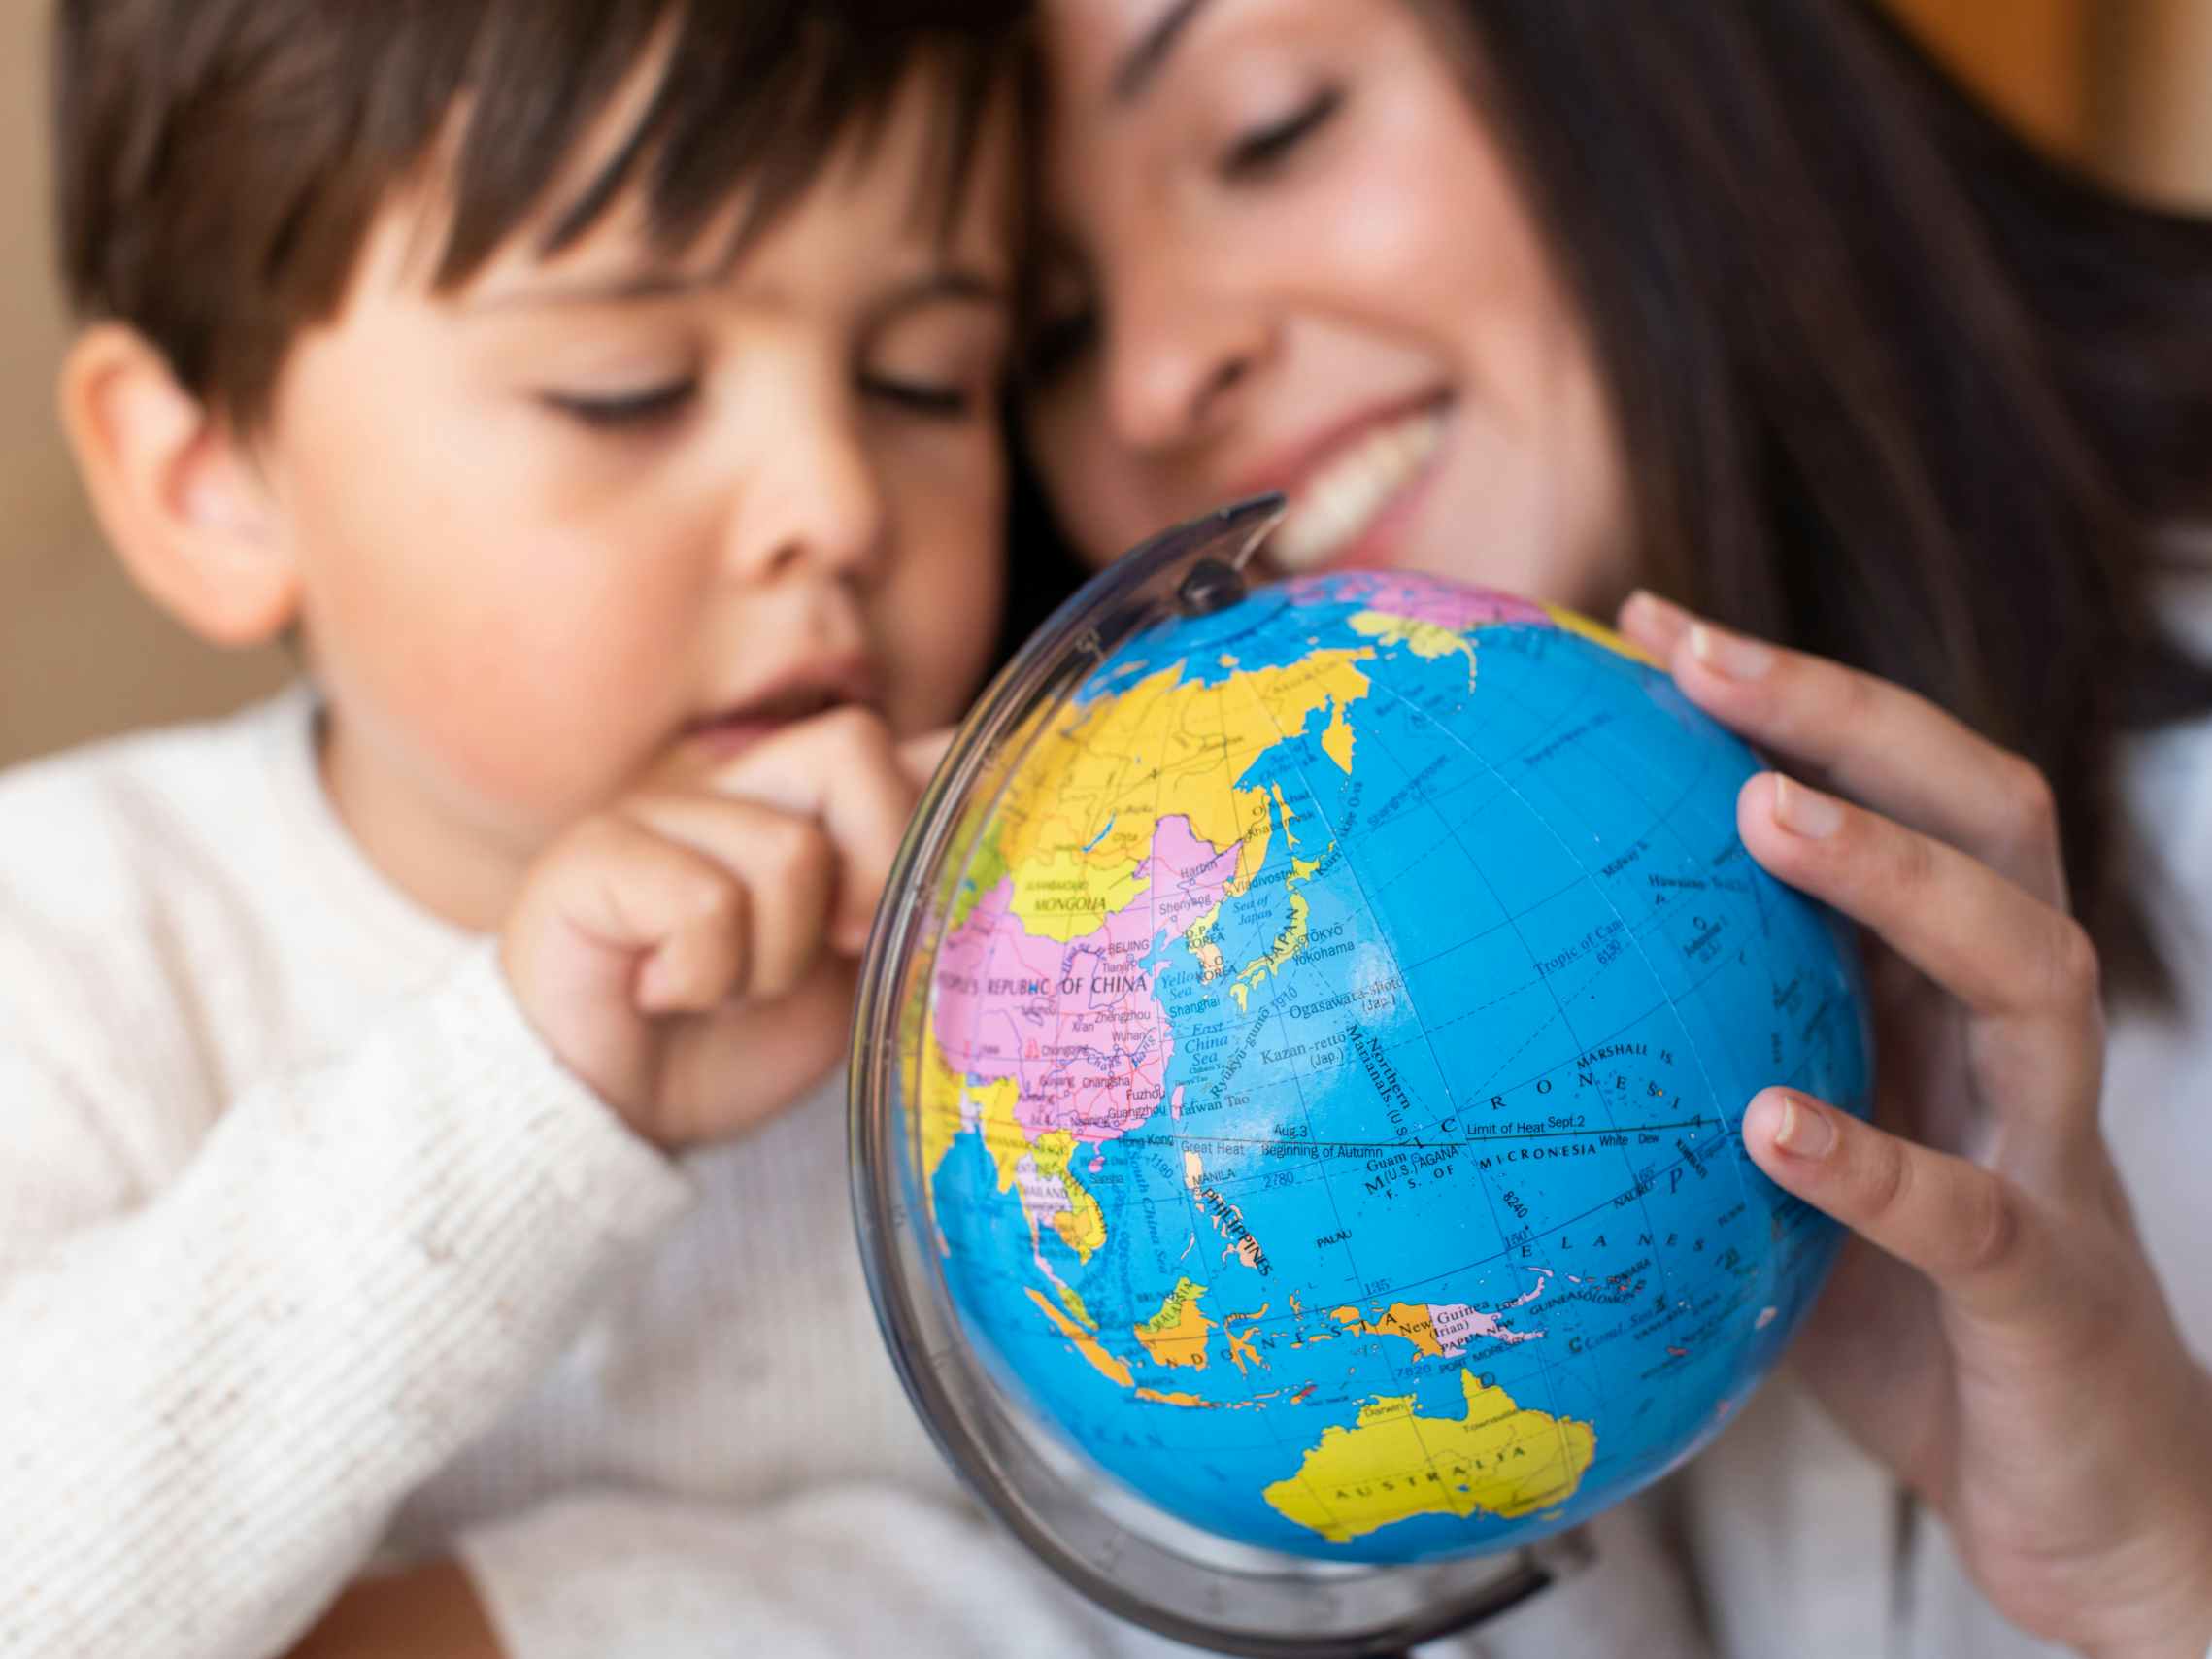 A child and parent looking at a globe together.